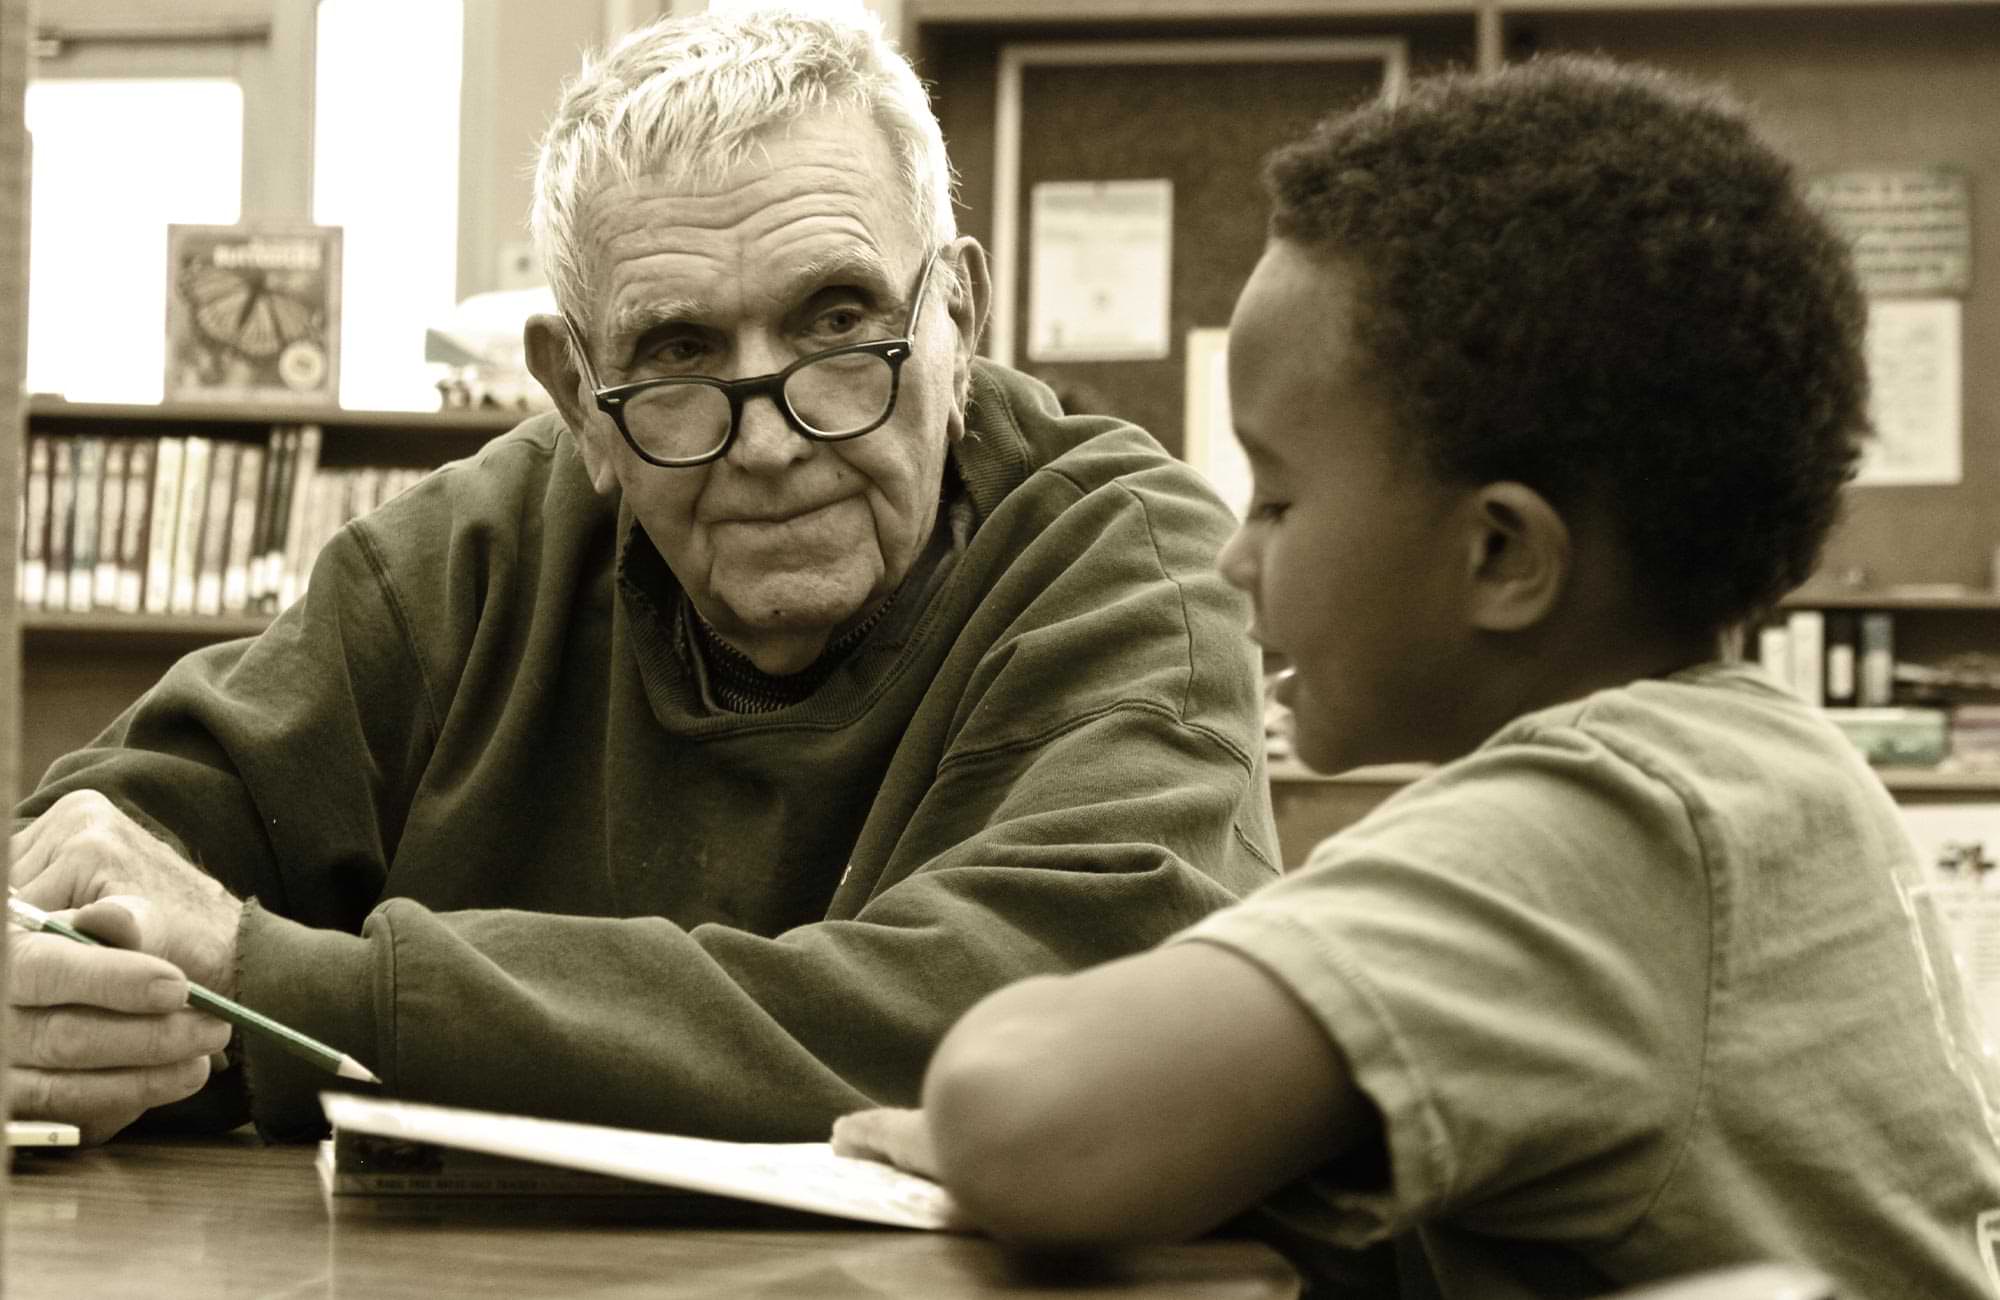 an older gentleman watches and guides with a pencil as a young boy sits beside him and reads